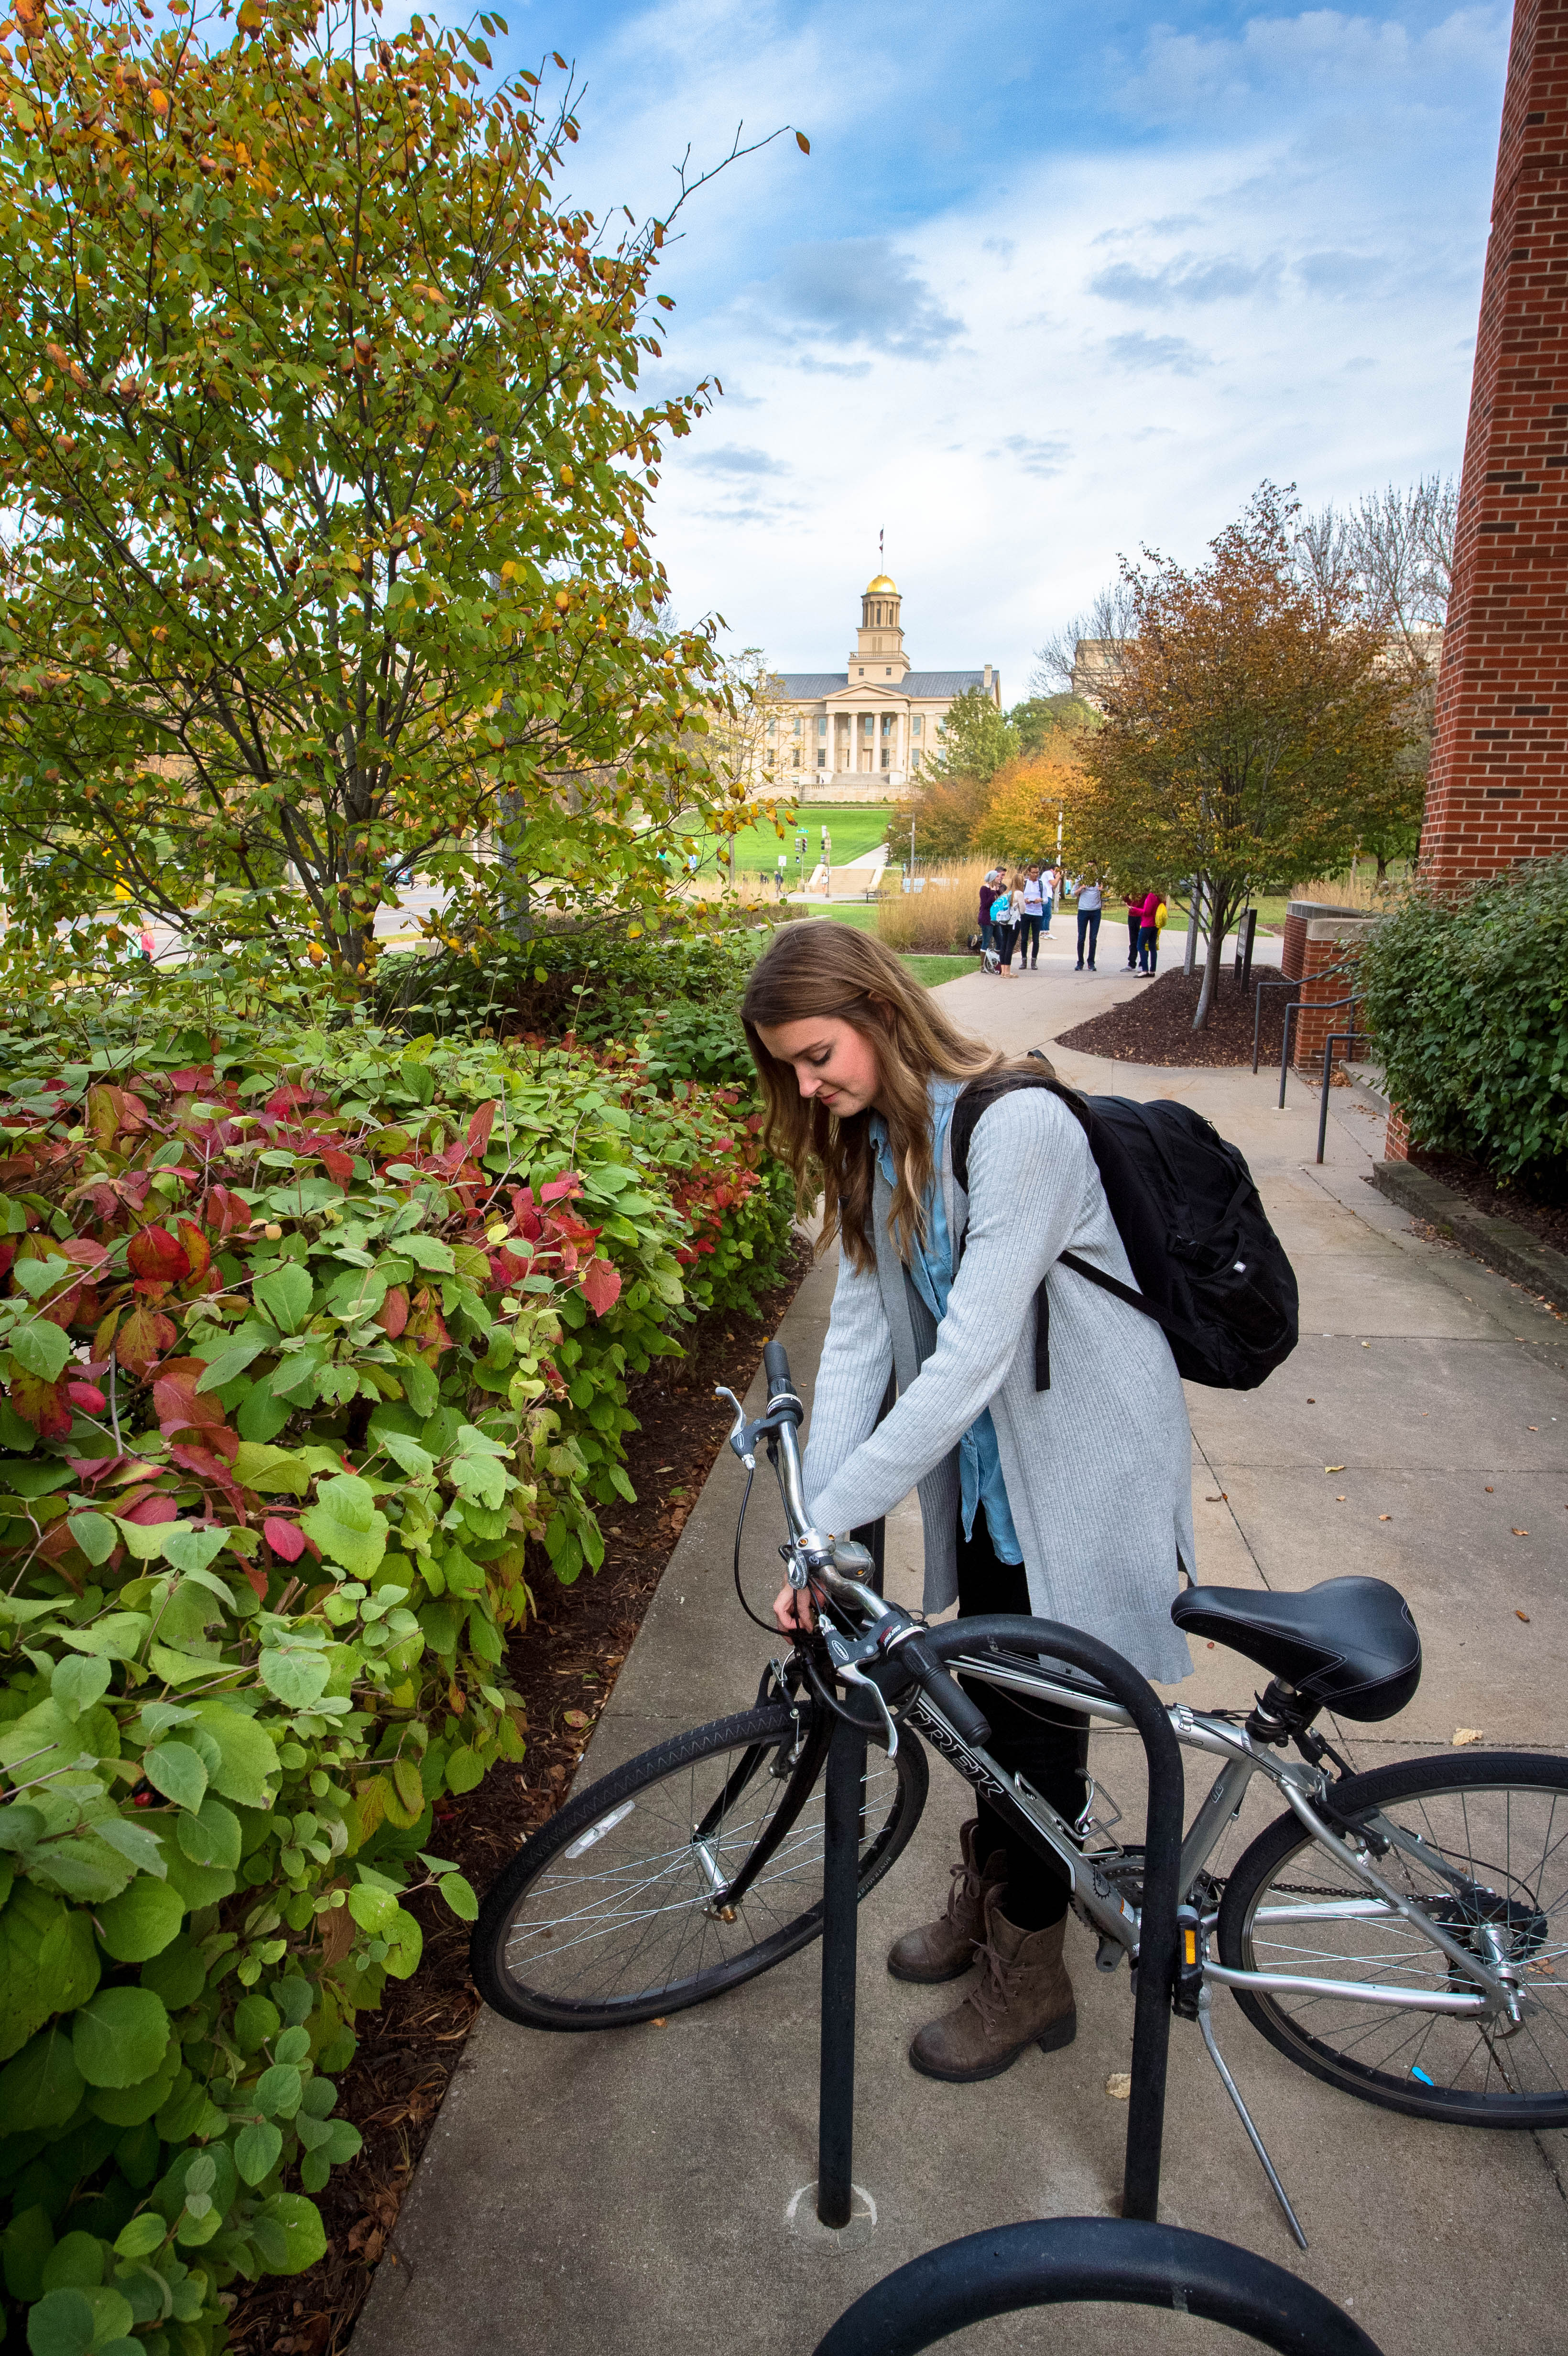 person wearing grey and light blue secures bicycle to rack using lock, university campus during spring with lots of green foliage and blue skies